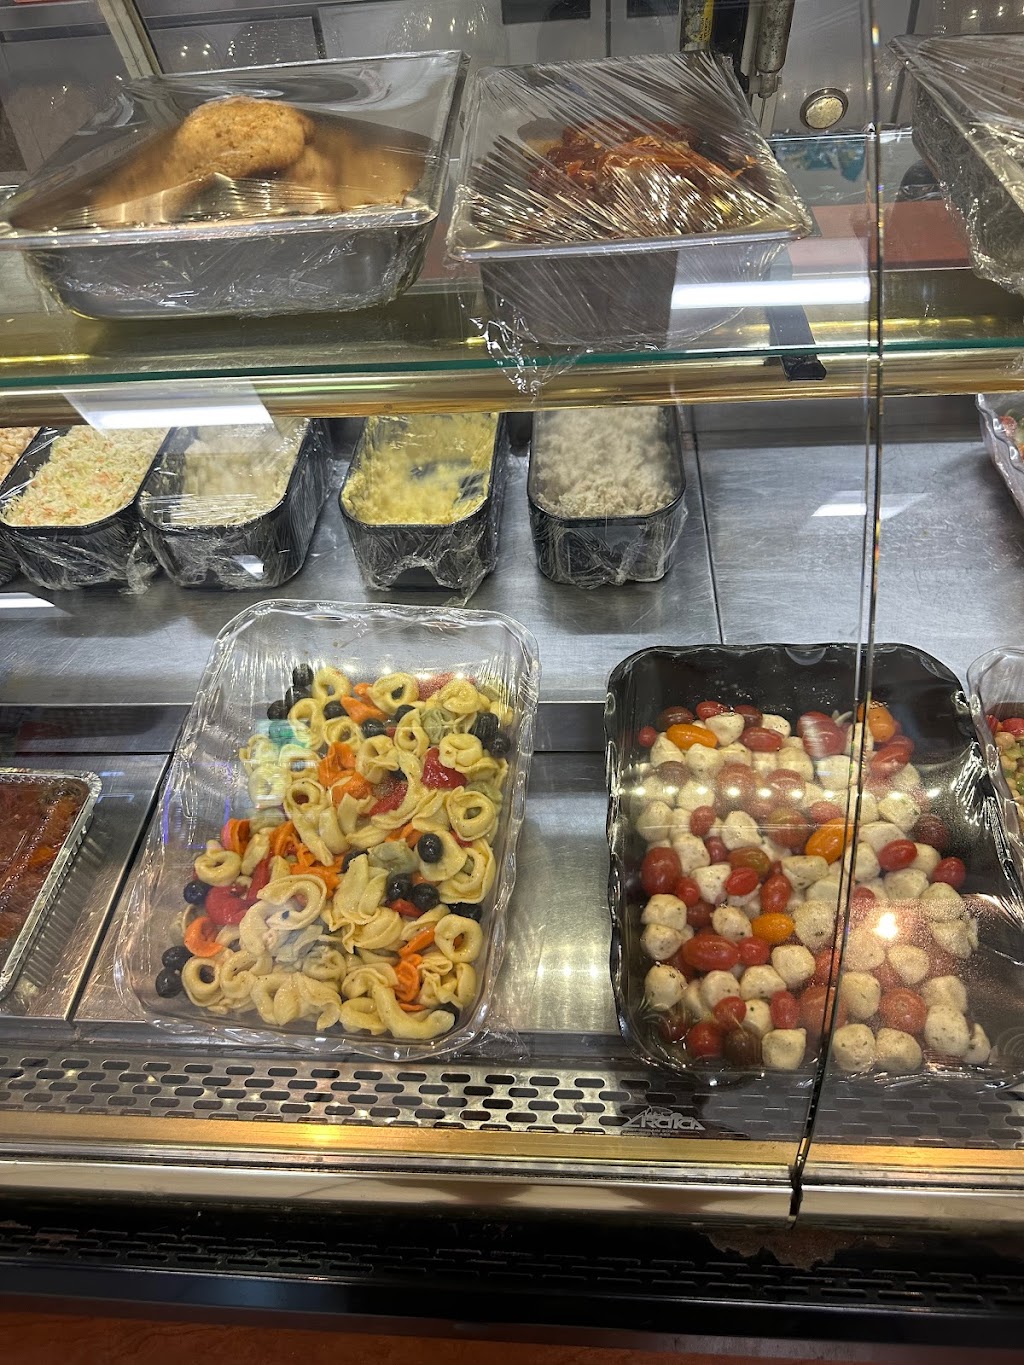 3 In 1 Deli & Grocery | 50 Hopatchung Rd, Hopatcong, NJ 07843 | Phone: (973) 398-5009